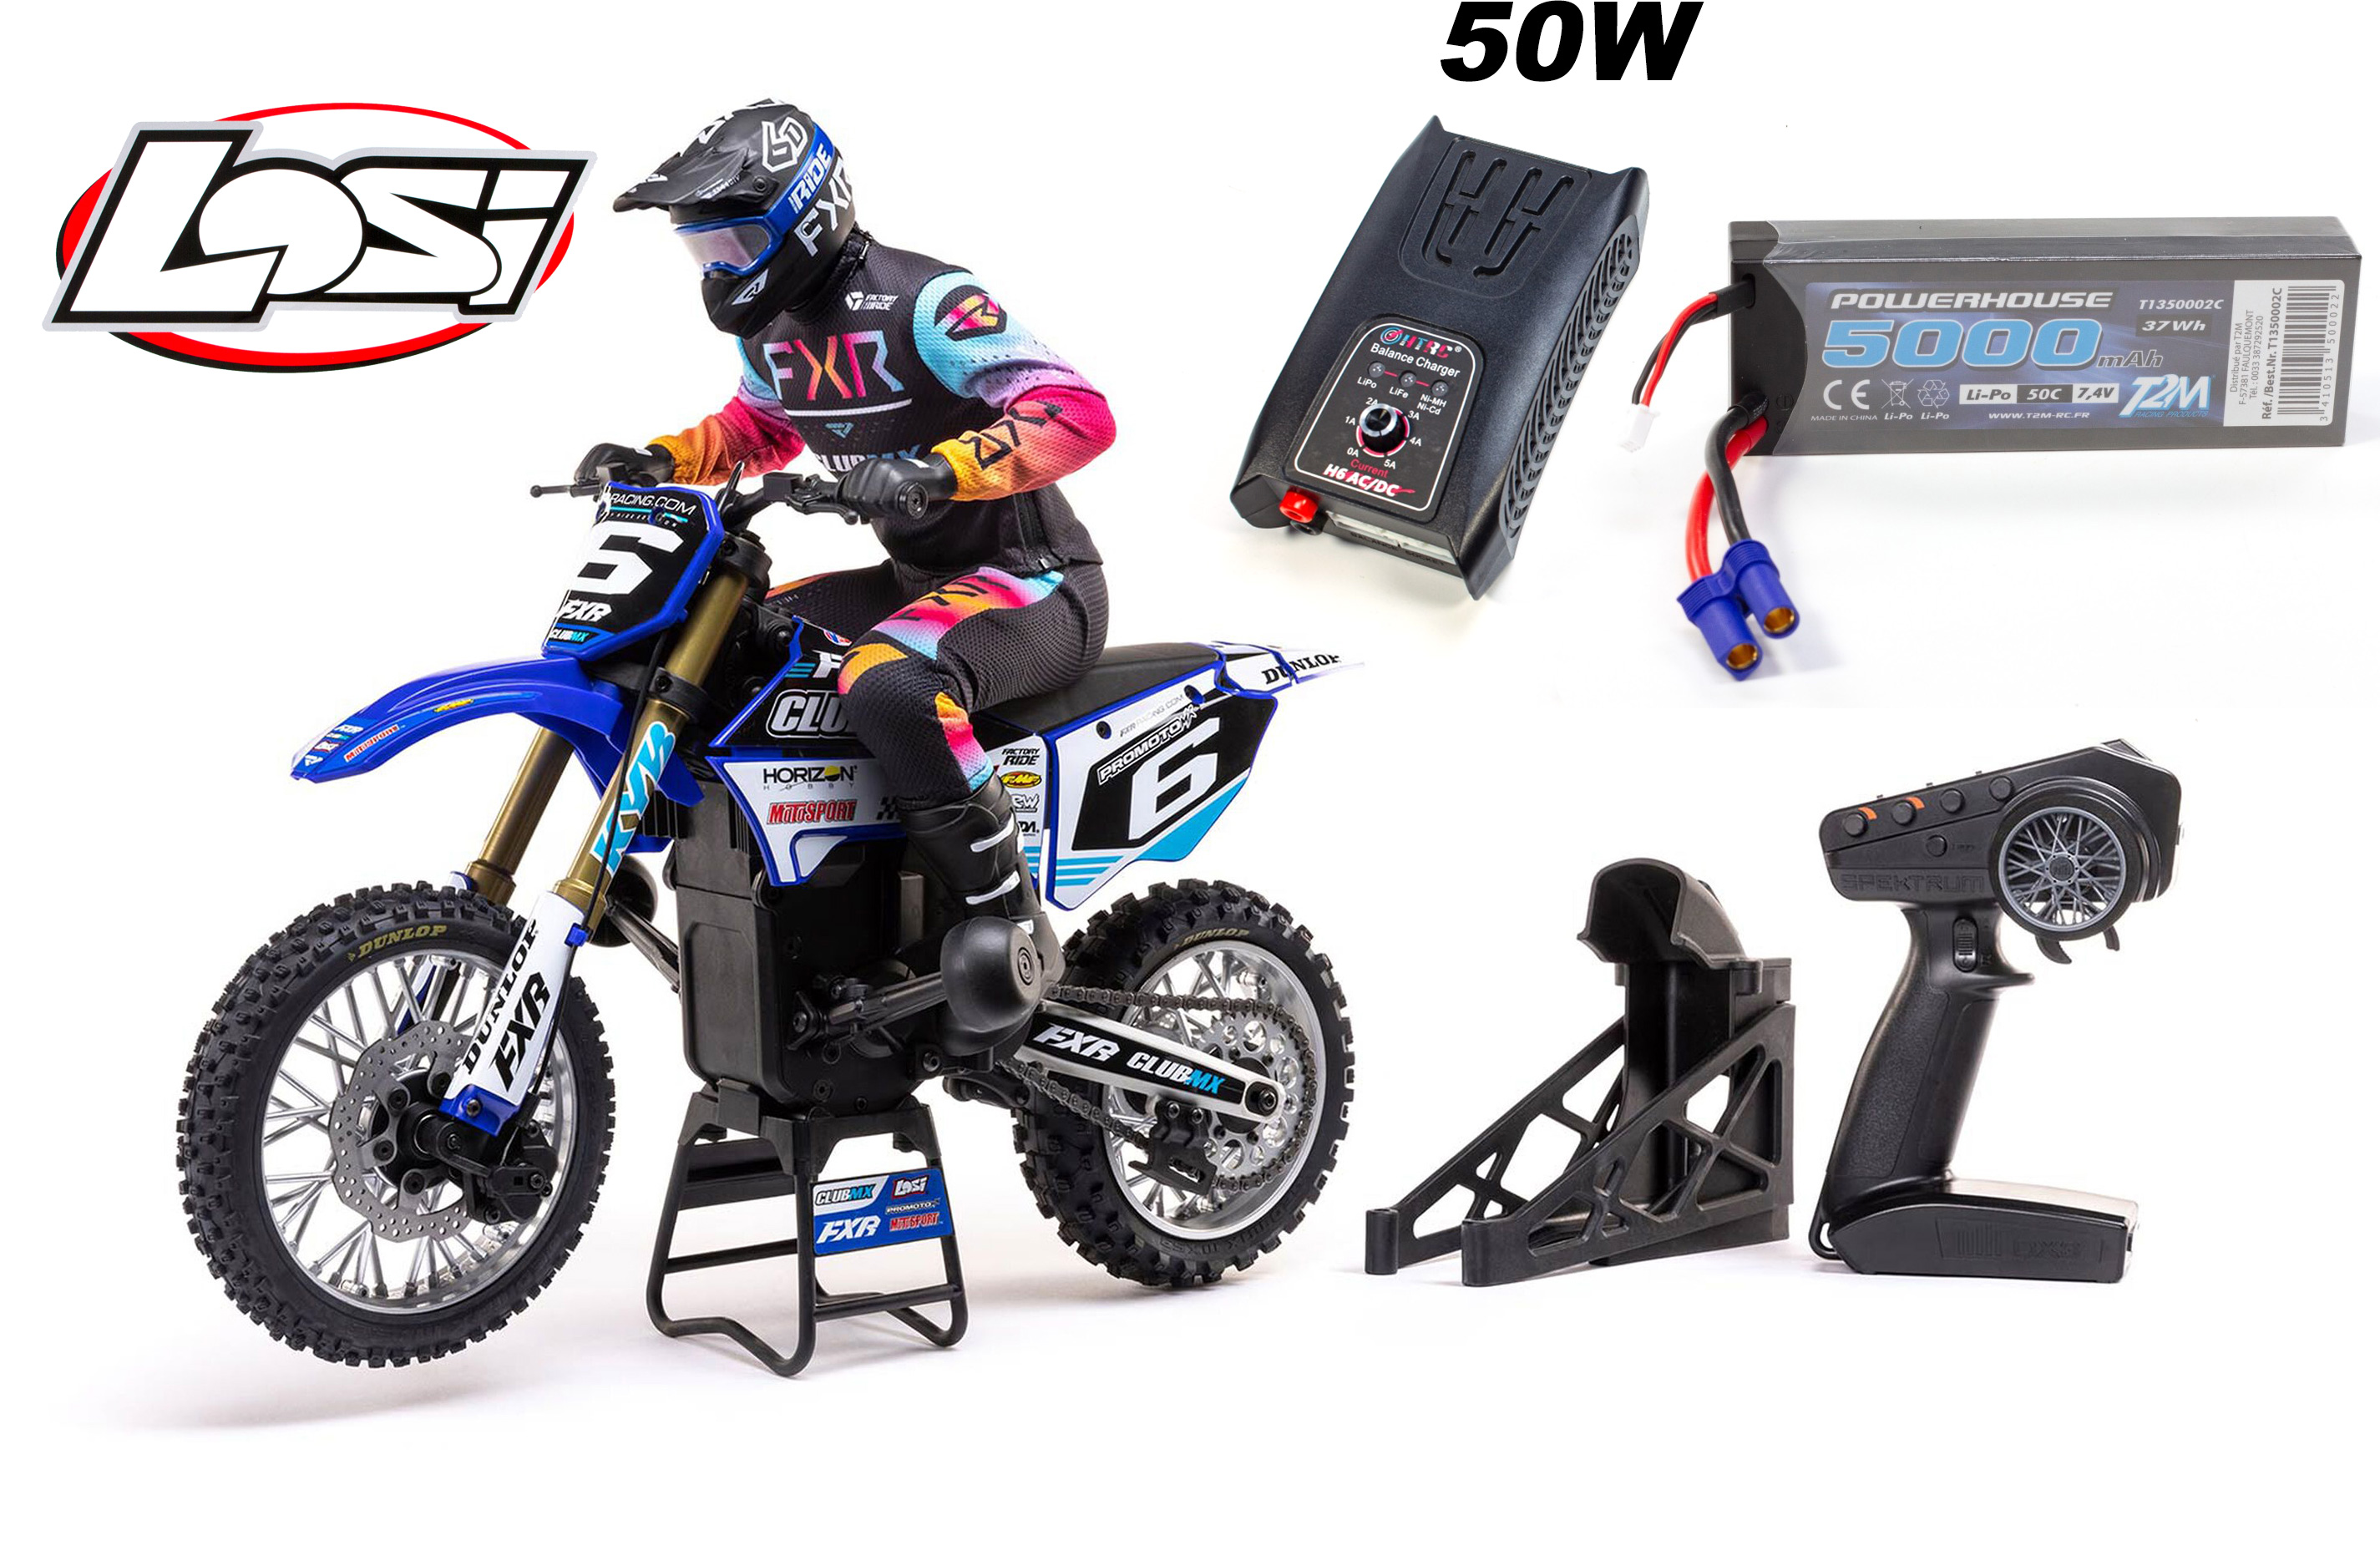 LOS06000T2/01 Losi 1/4 Promoto-MX Motorcycle RTR with Battery and Charger 50W, Club MX